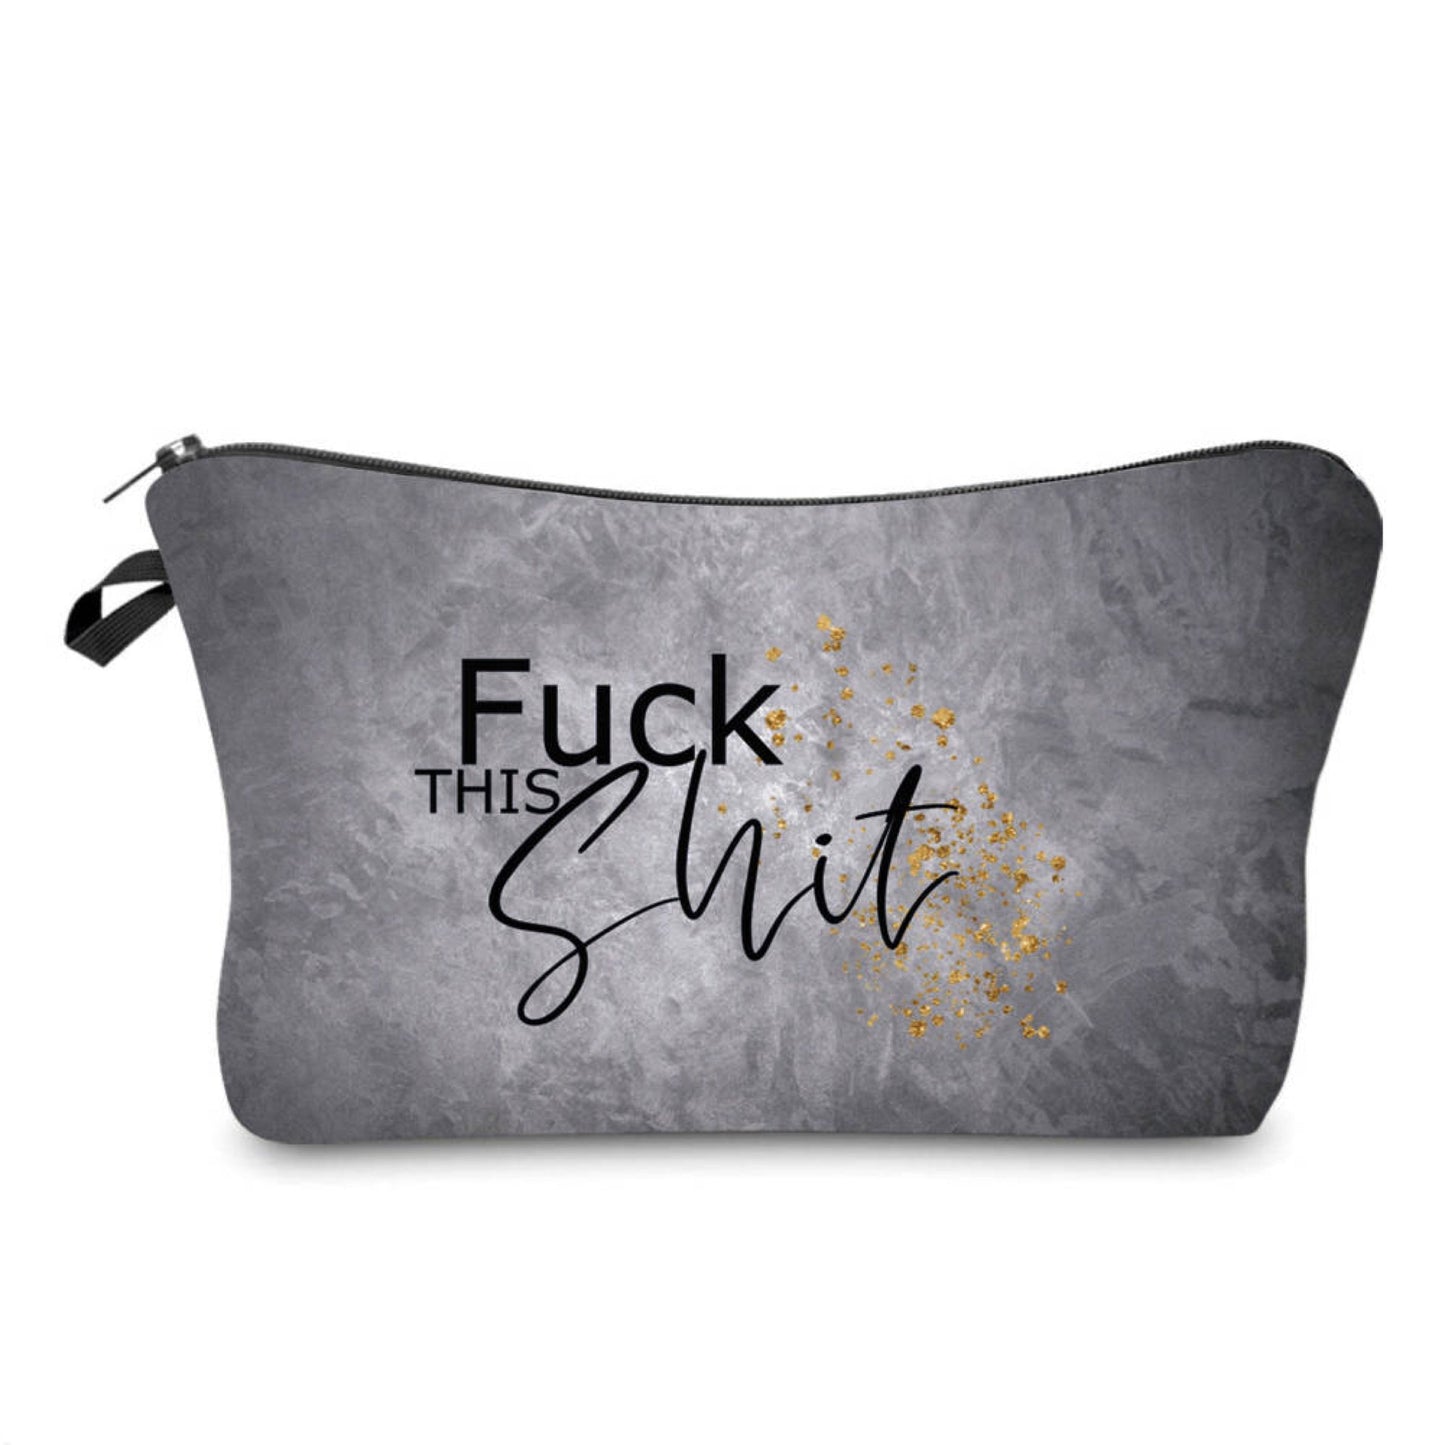 Fu*k This Sh!t - Water-Resistant Multi-Use Pouch